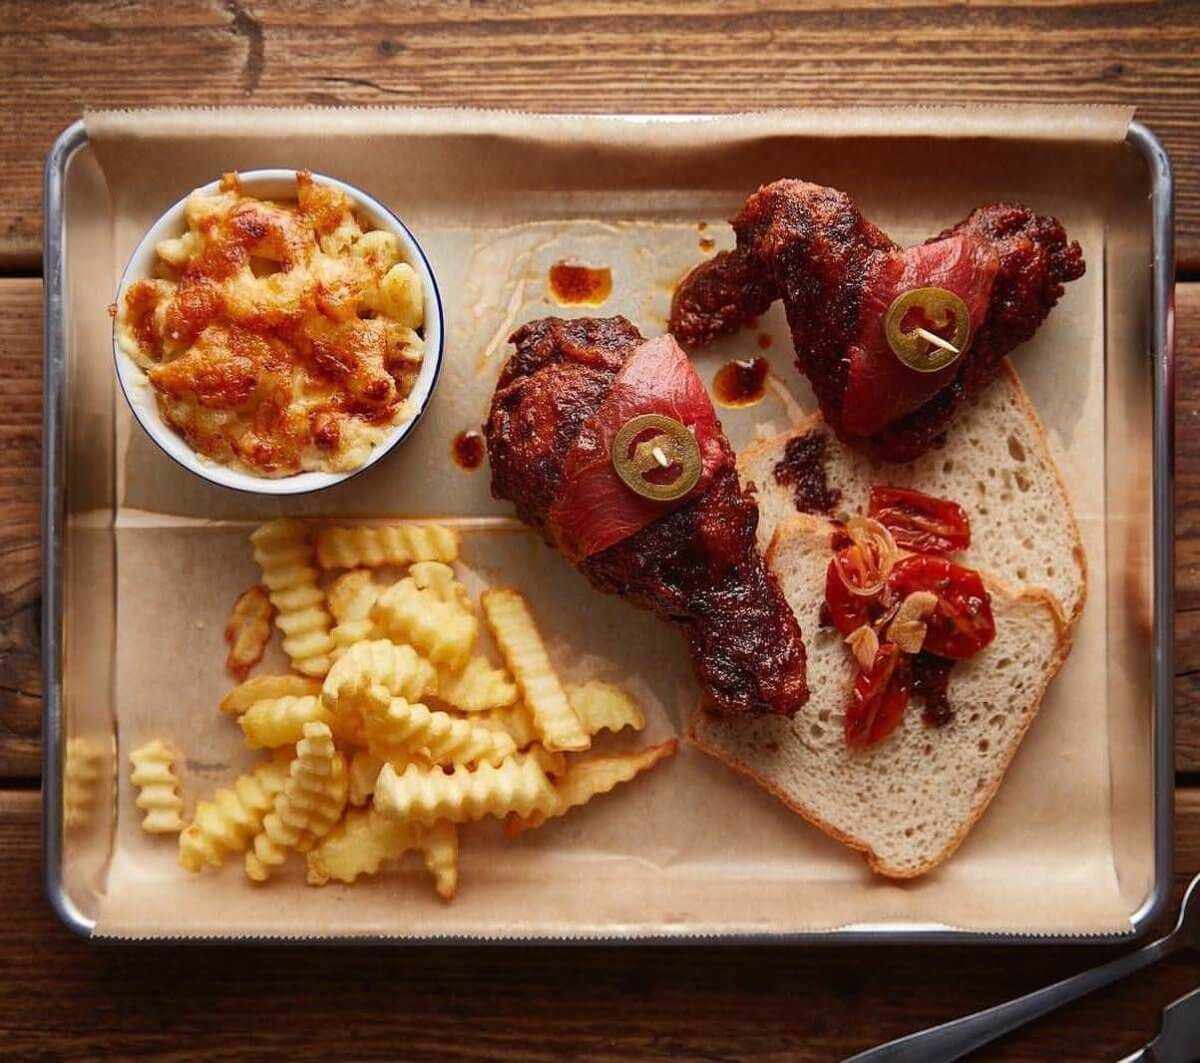 Authentic southern American eatery & bar opens in Fulham